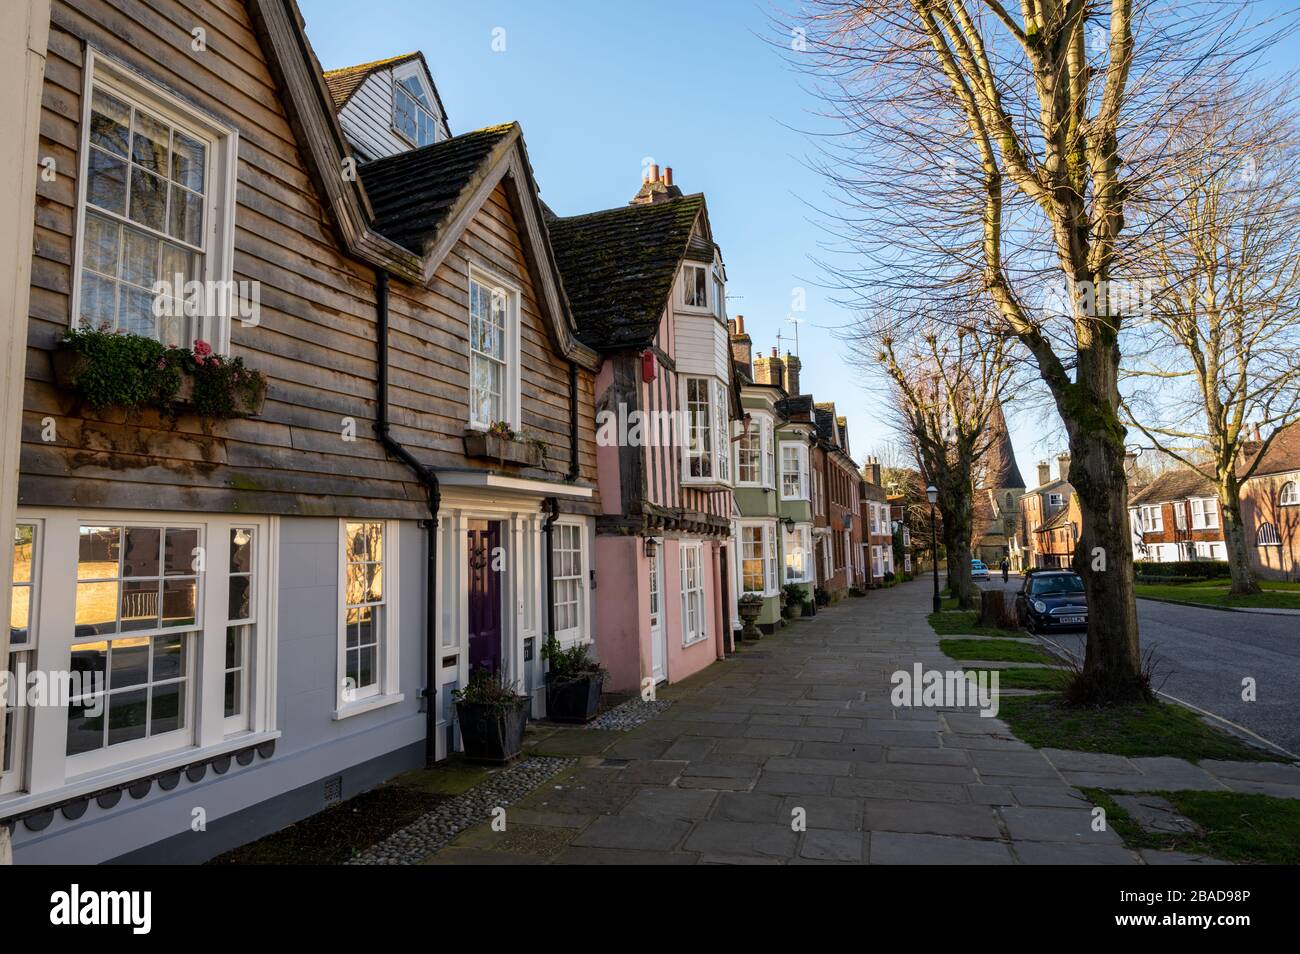 Row of old houses on Causeway, a street in the historic part of Horsham, a market town in West Sussex, England. Stock Photo